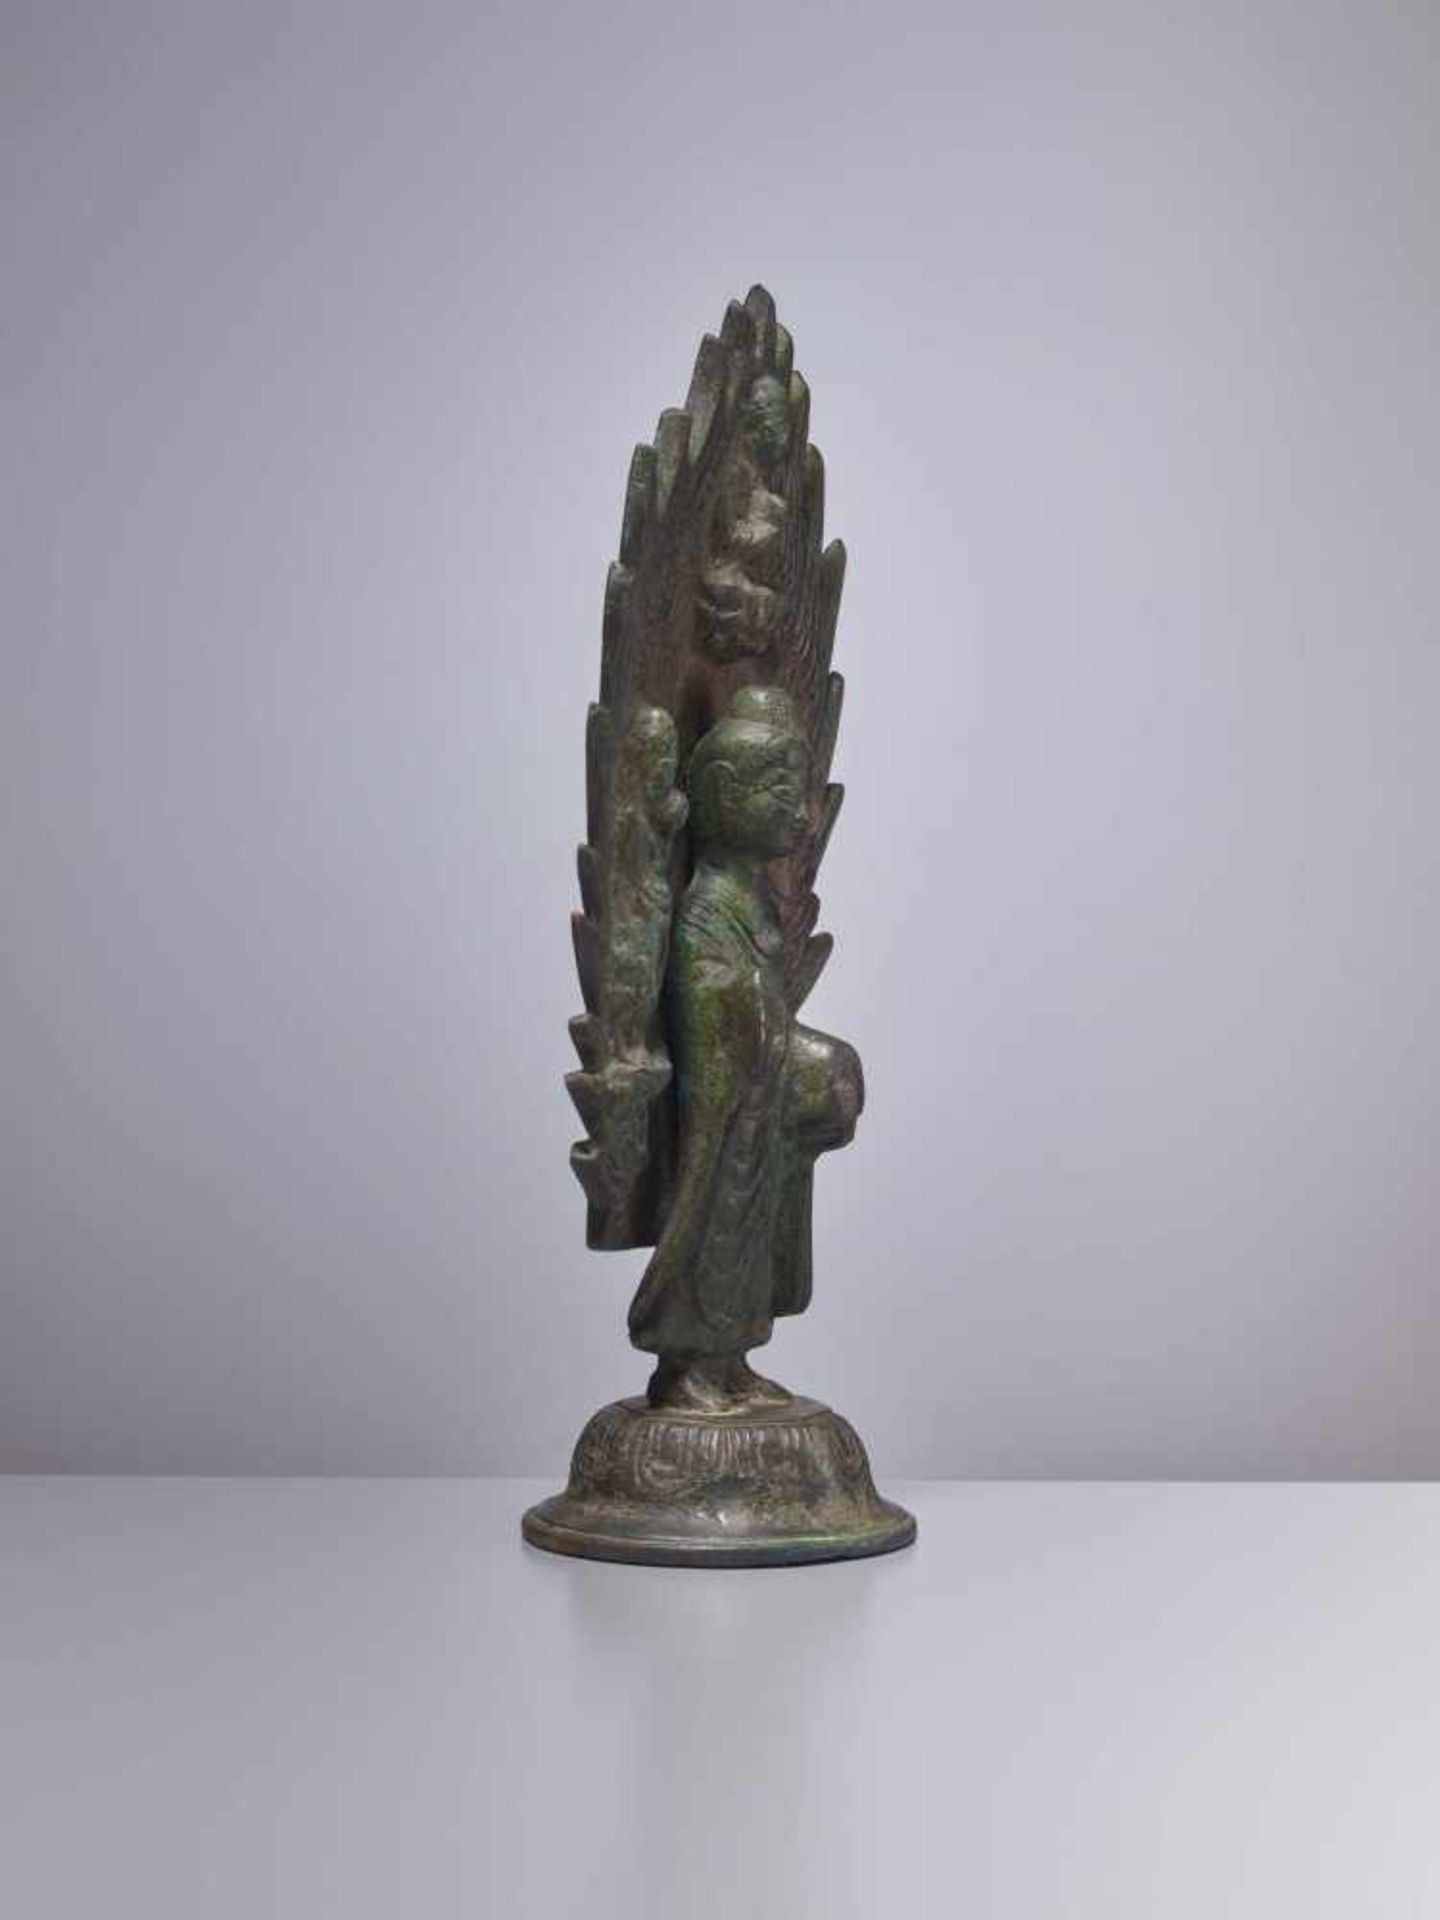 A BRONZE BUDDHA STANDING IN FRONT OF A FLAMING HALO, DATED 571 Cast and incised bronze with a rich - Image 4 of 7